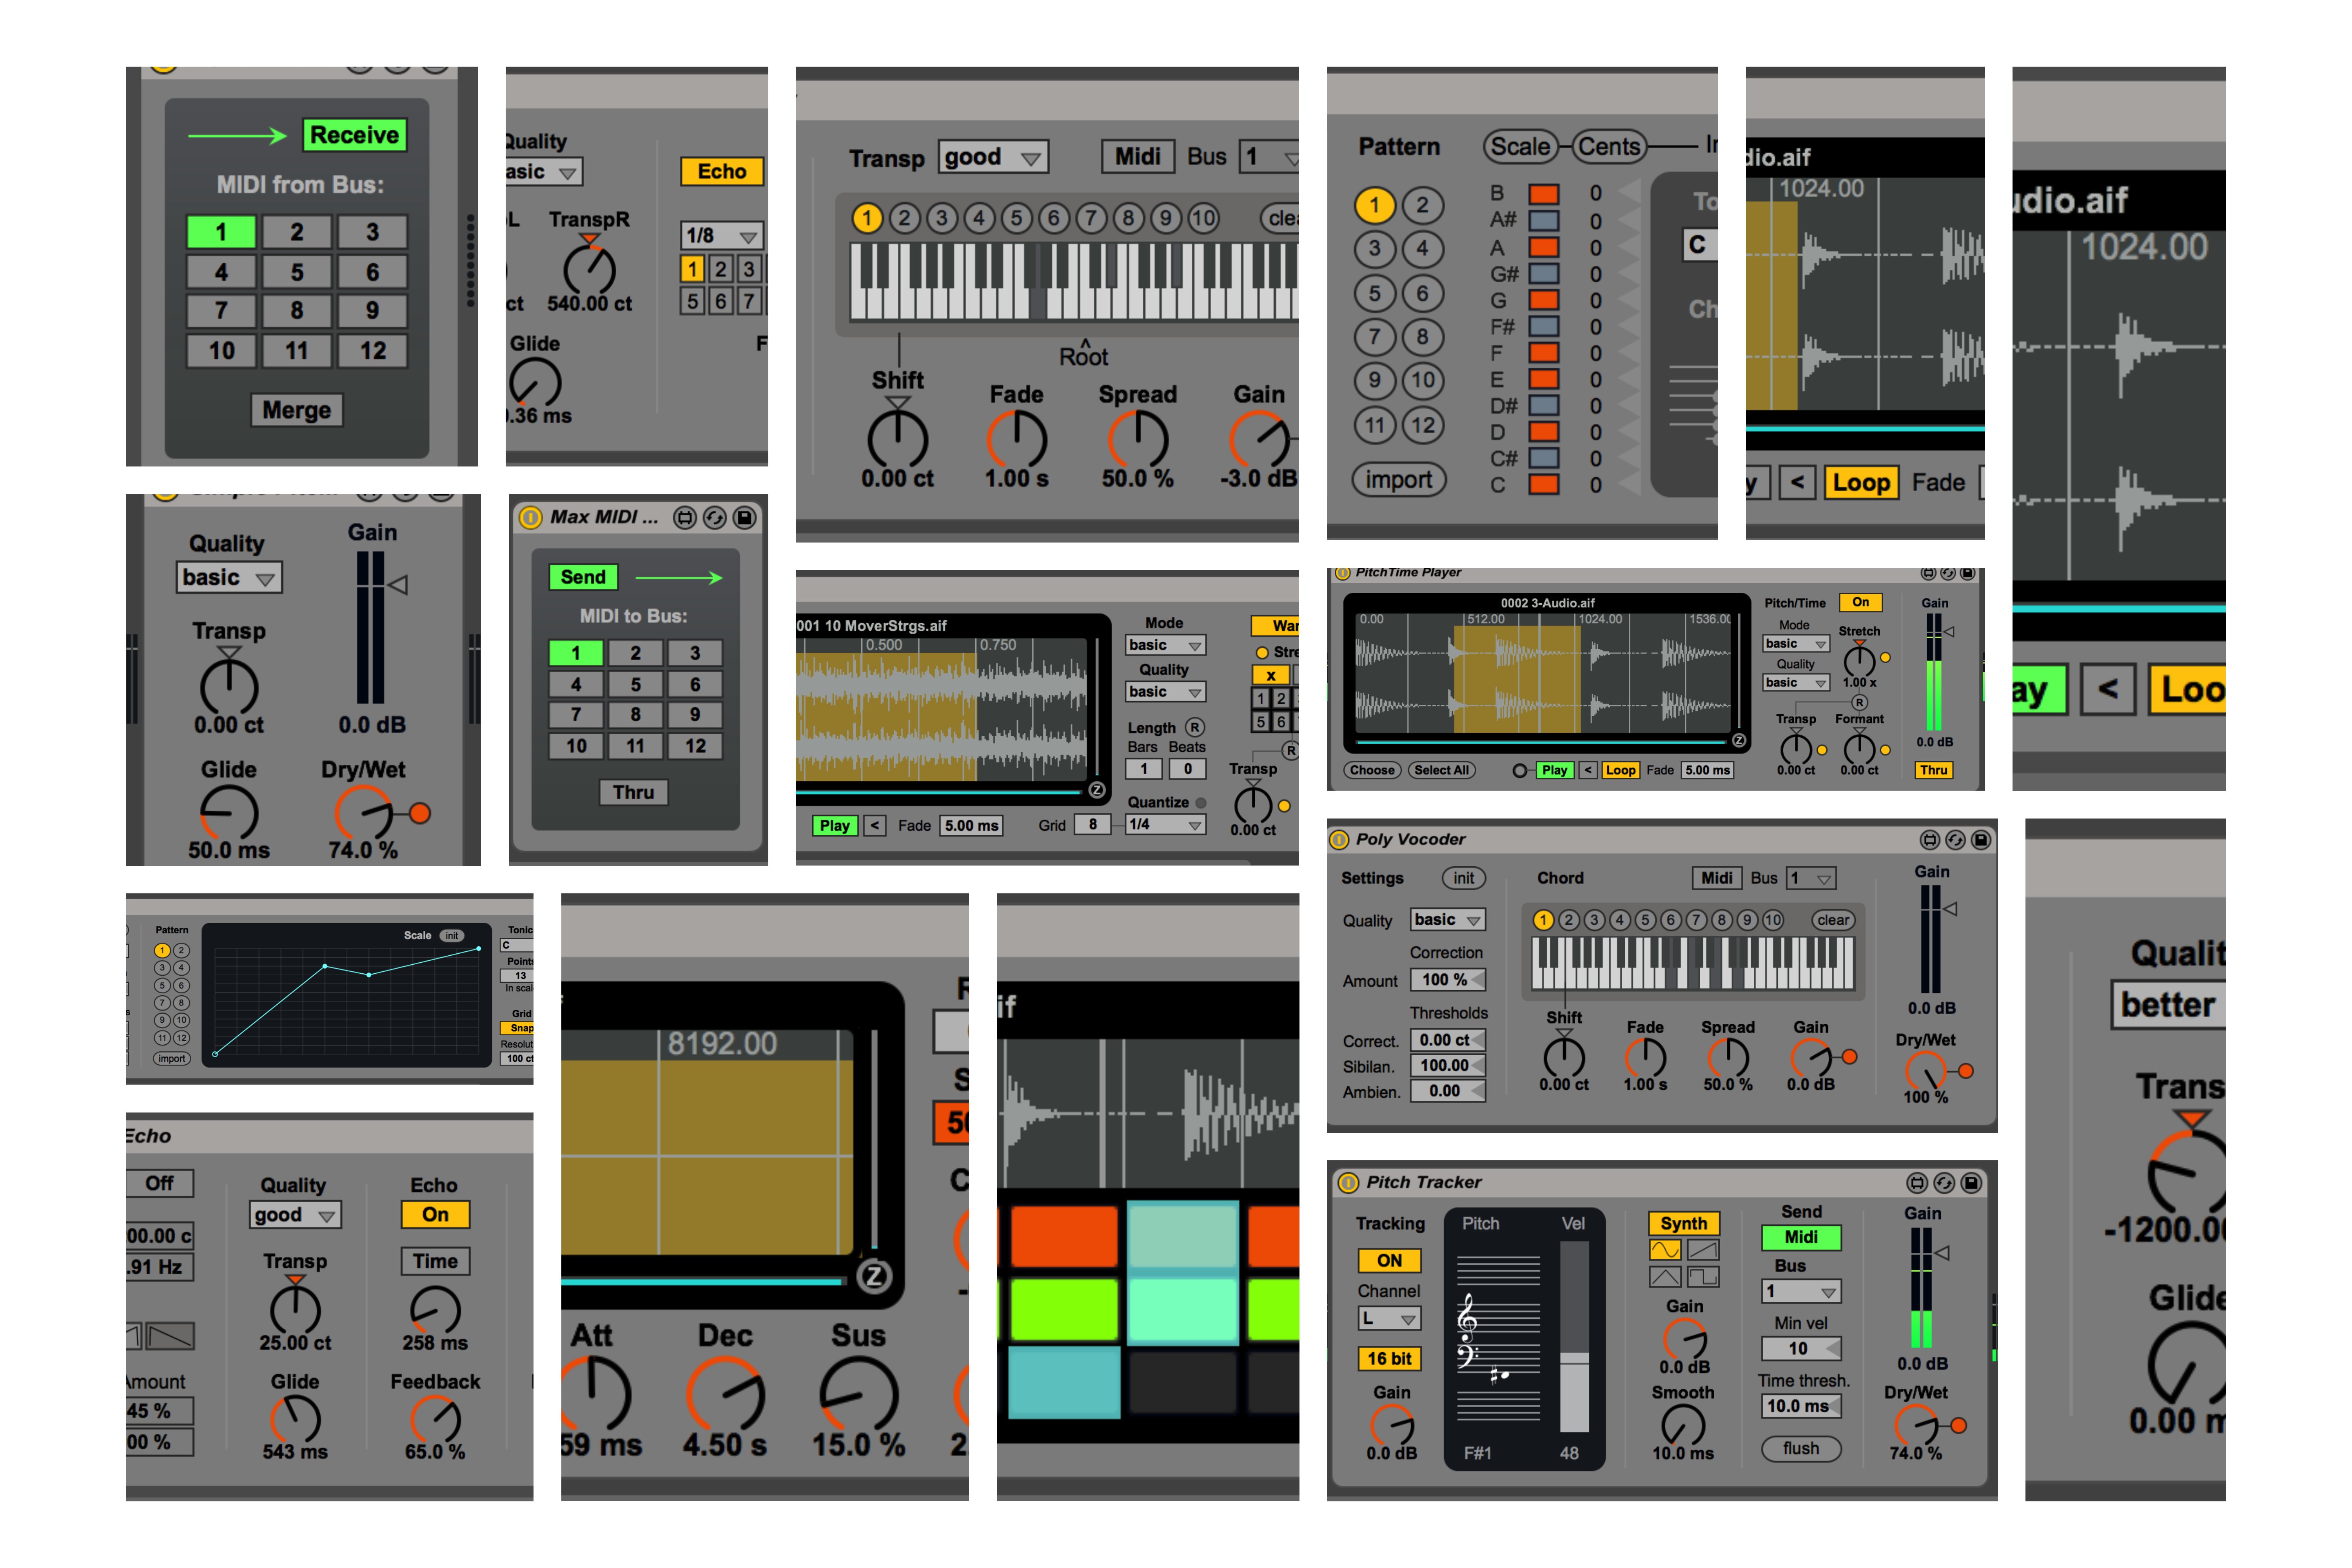 update os x to 10.11 ableton live 9.7.5